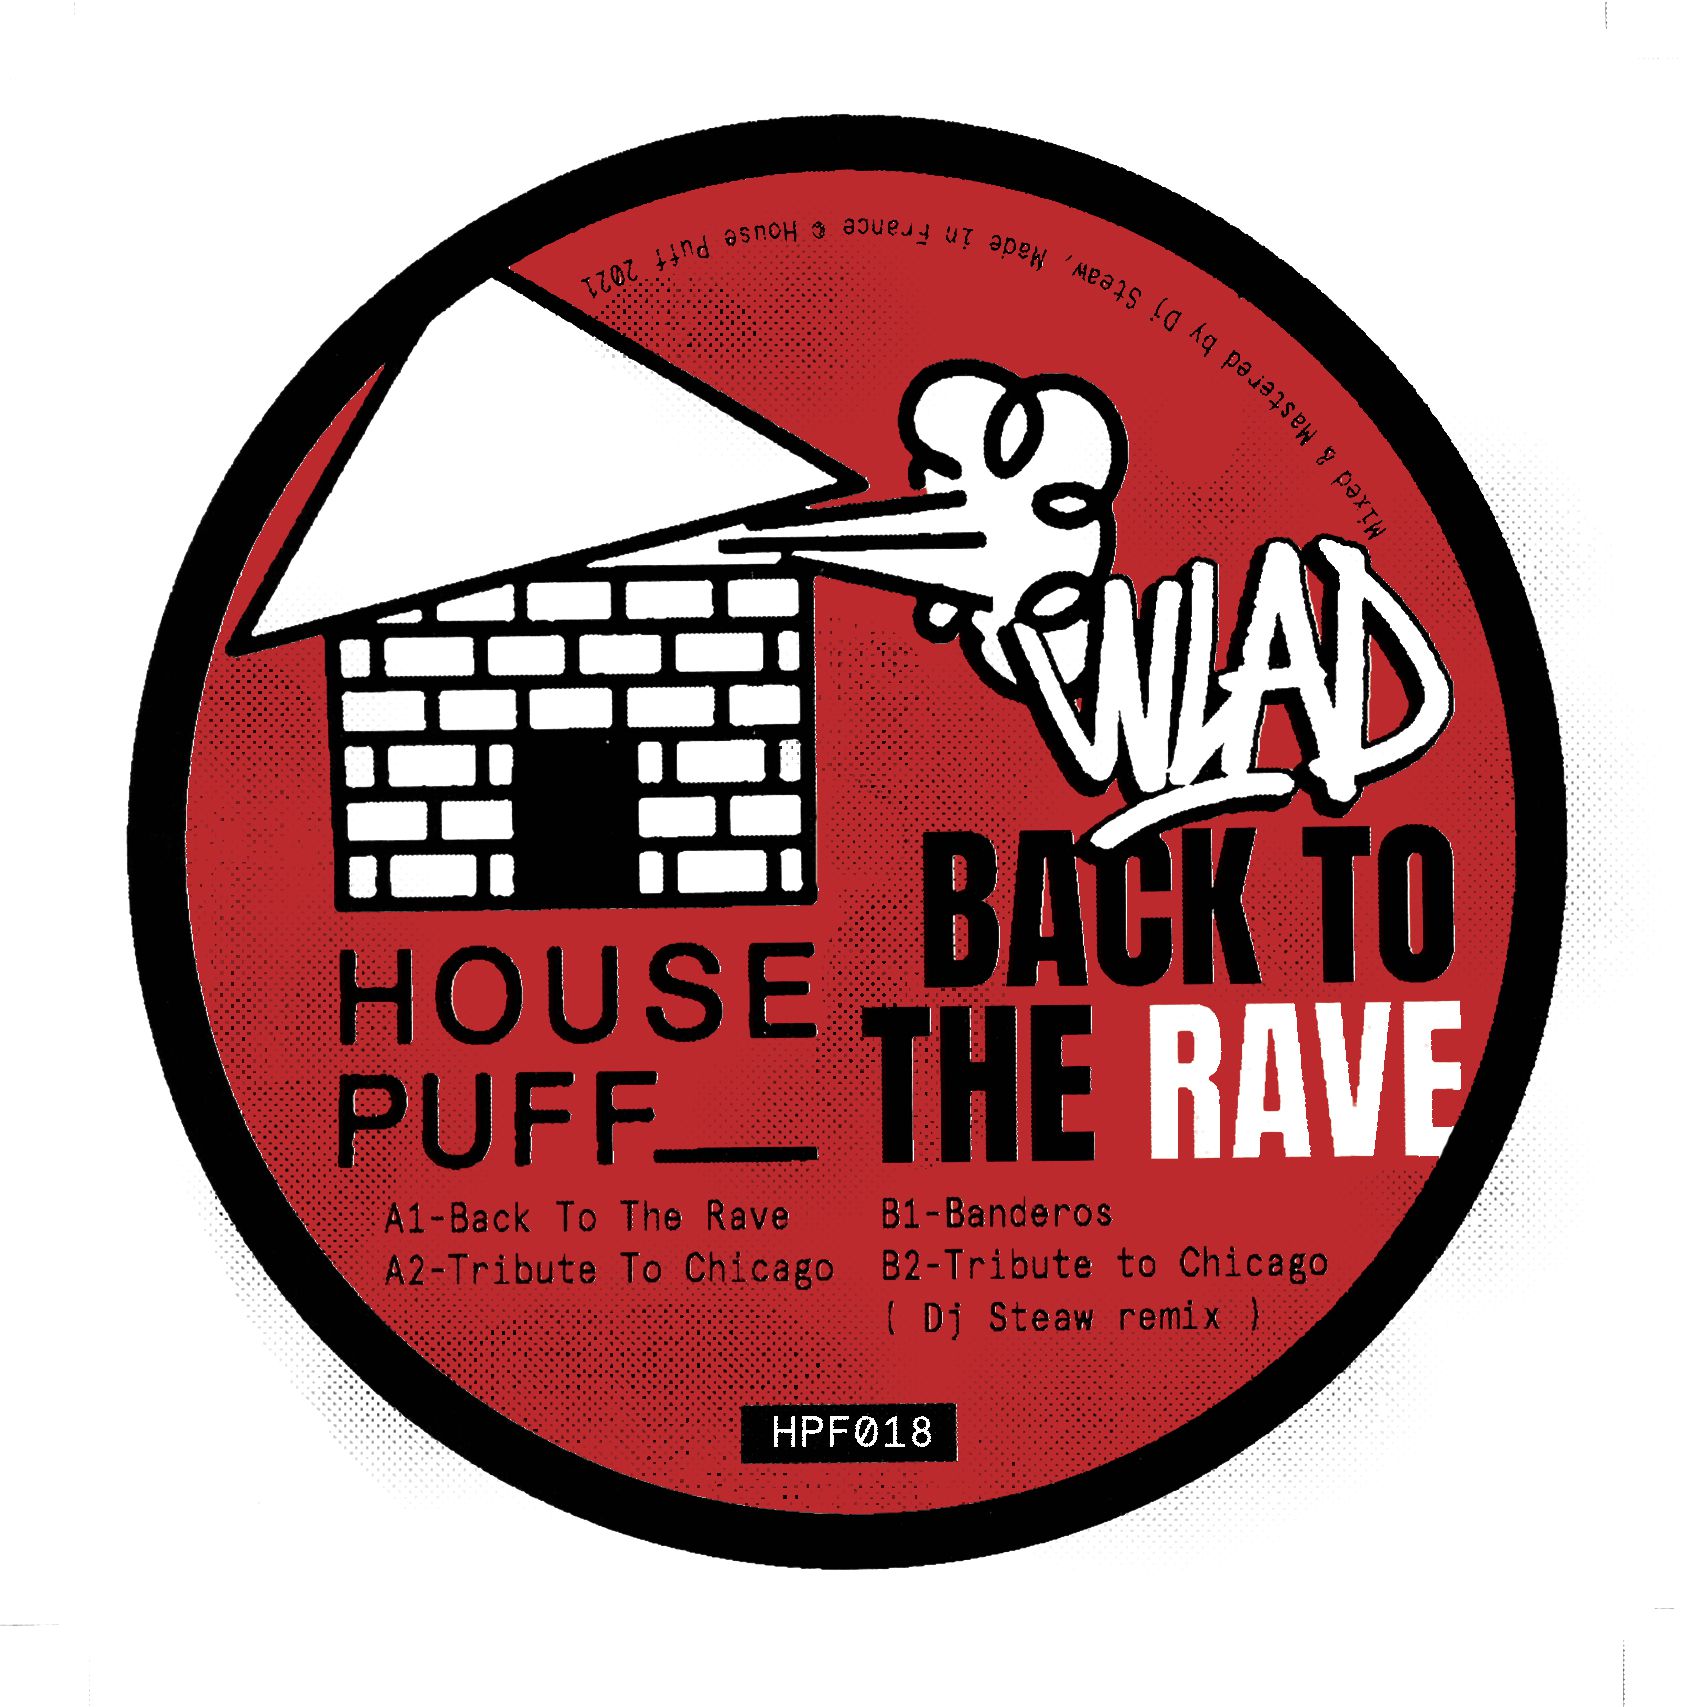 WLAD/BACK TO THE RAVE EP 12"